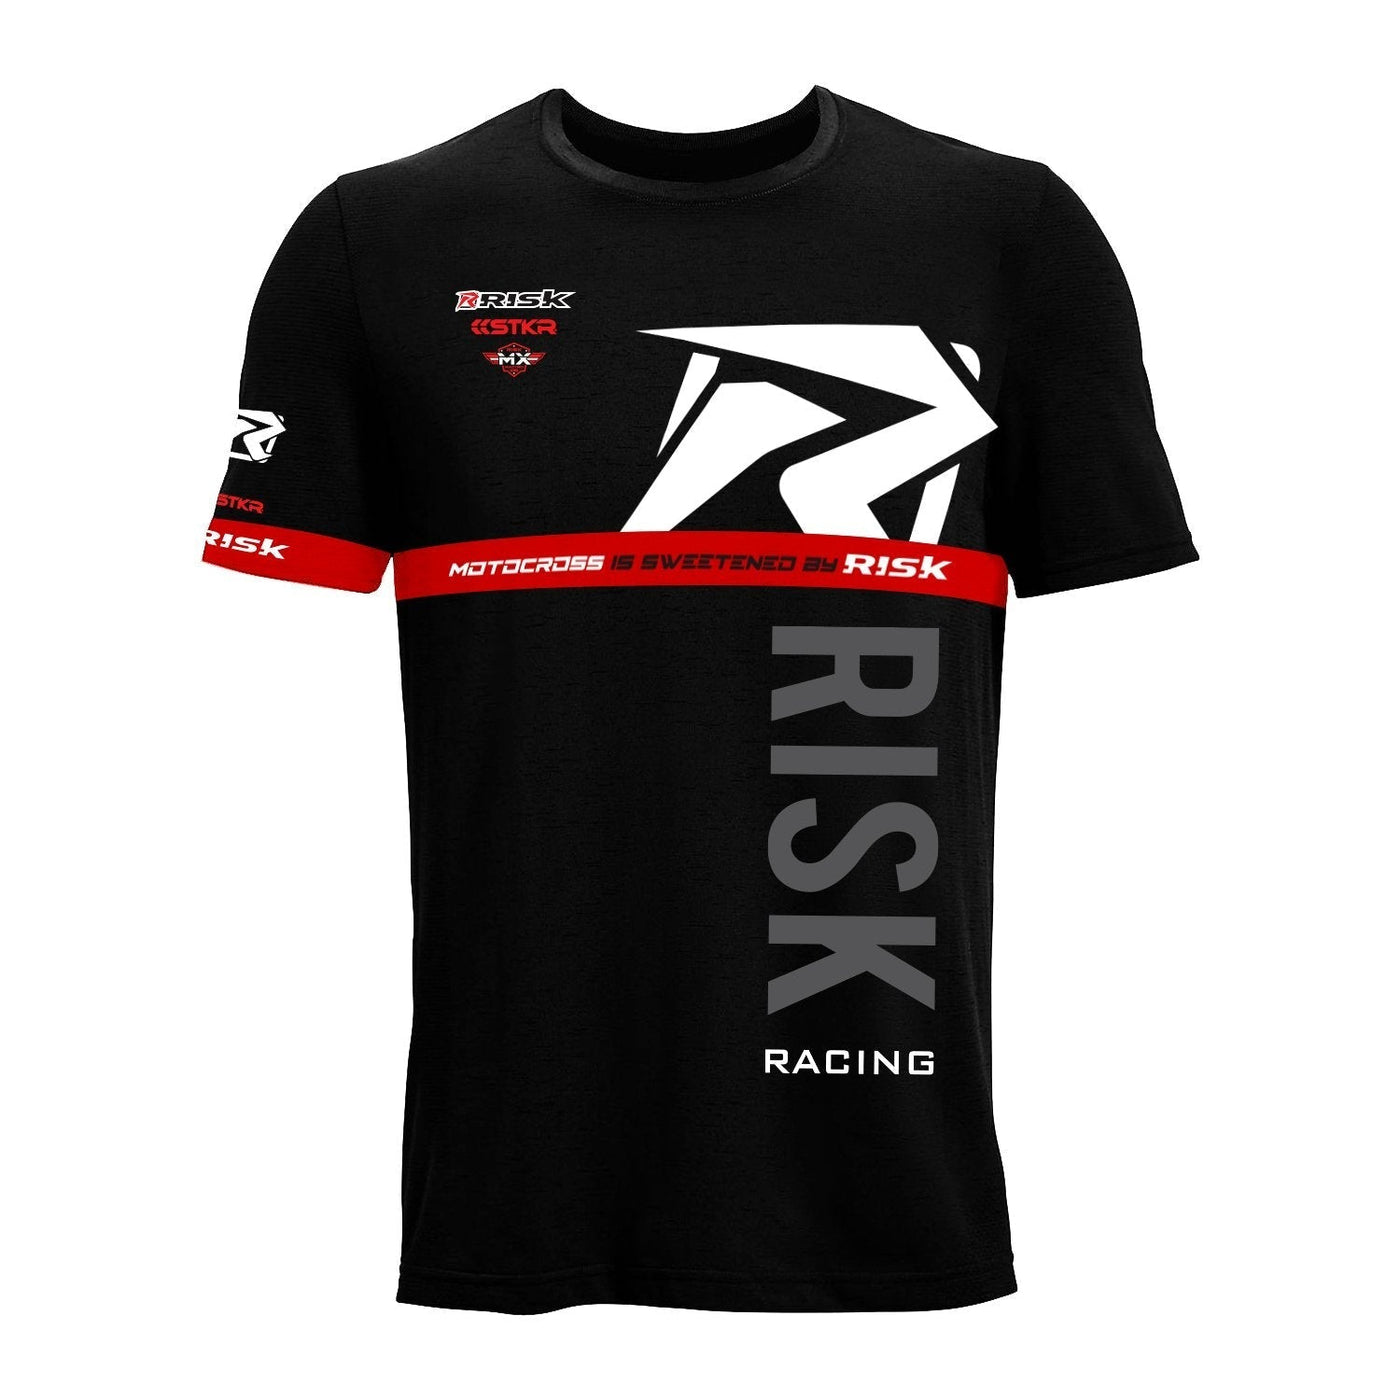 Risk Racing Premium Athletic T Shirt, Black / Red, XX Large